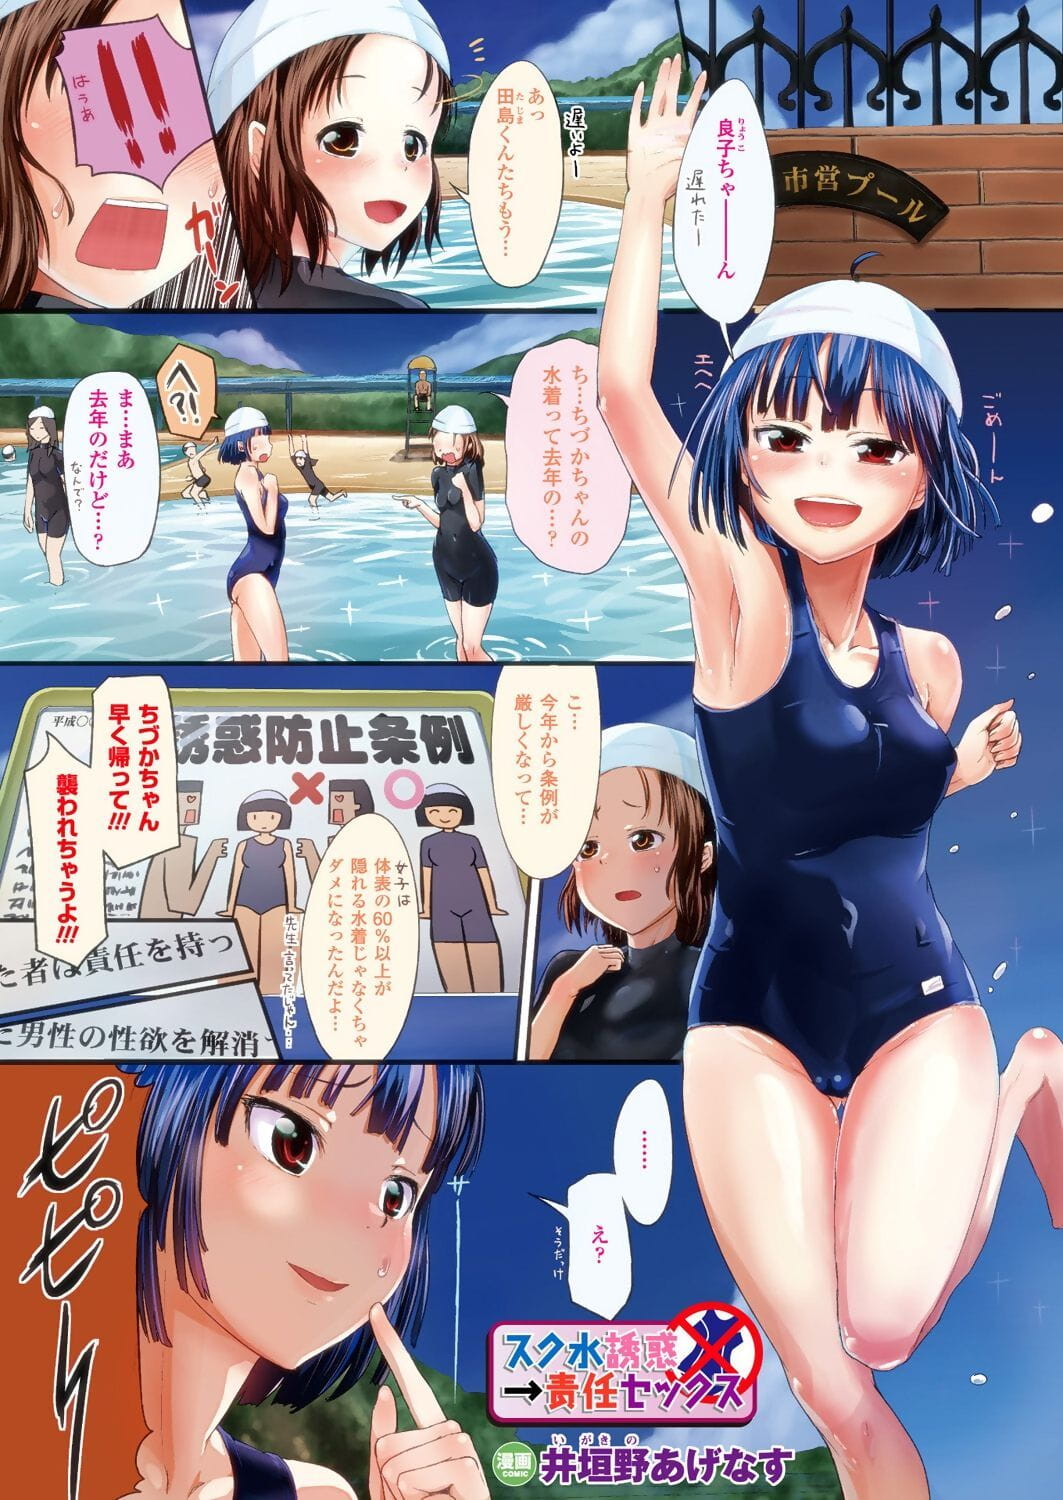 Bessatsu Comic Unreal Color Comic Collection 6 side_R - part 2 page 1